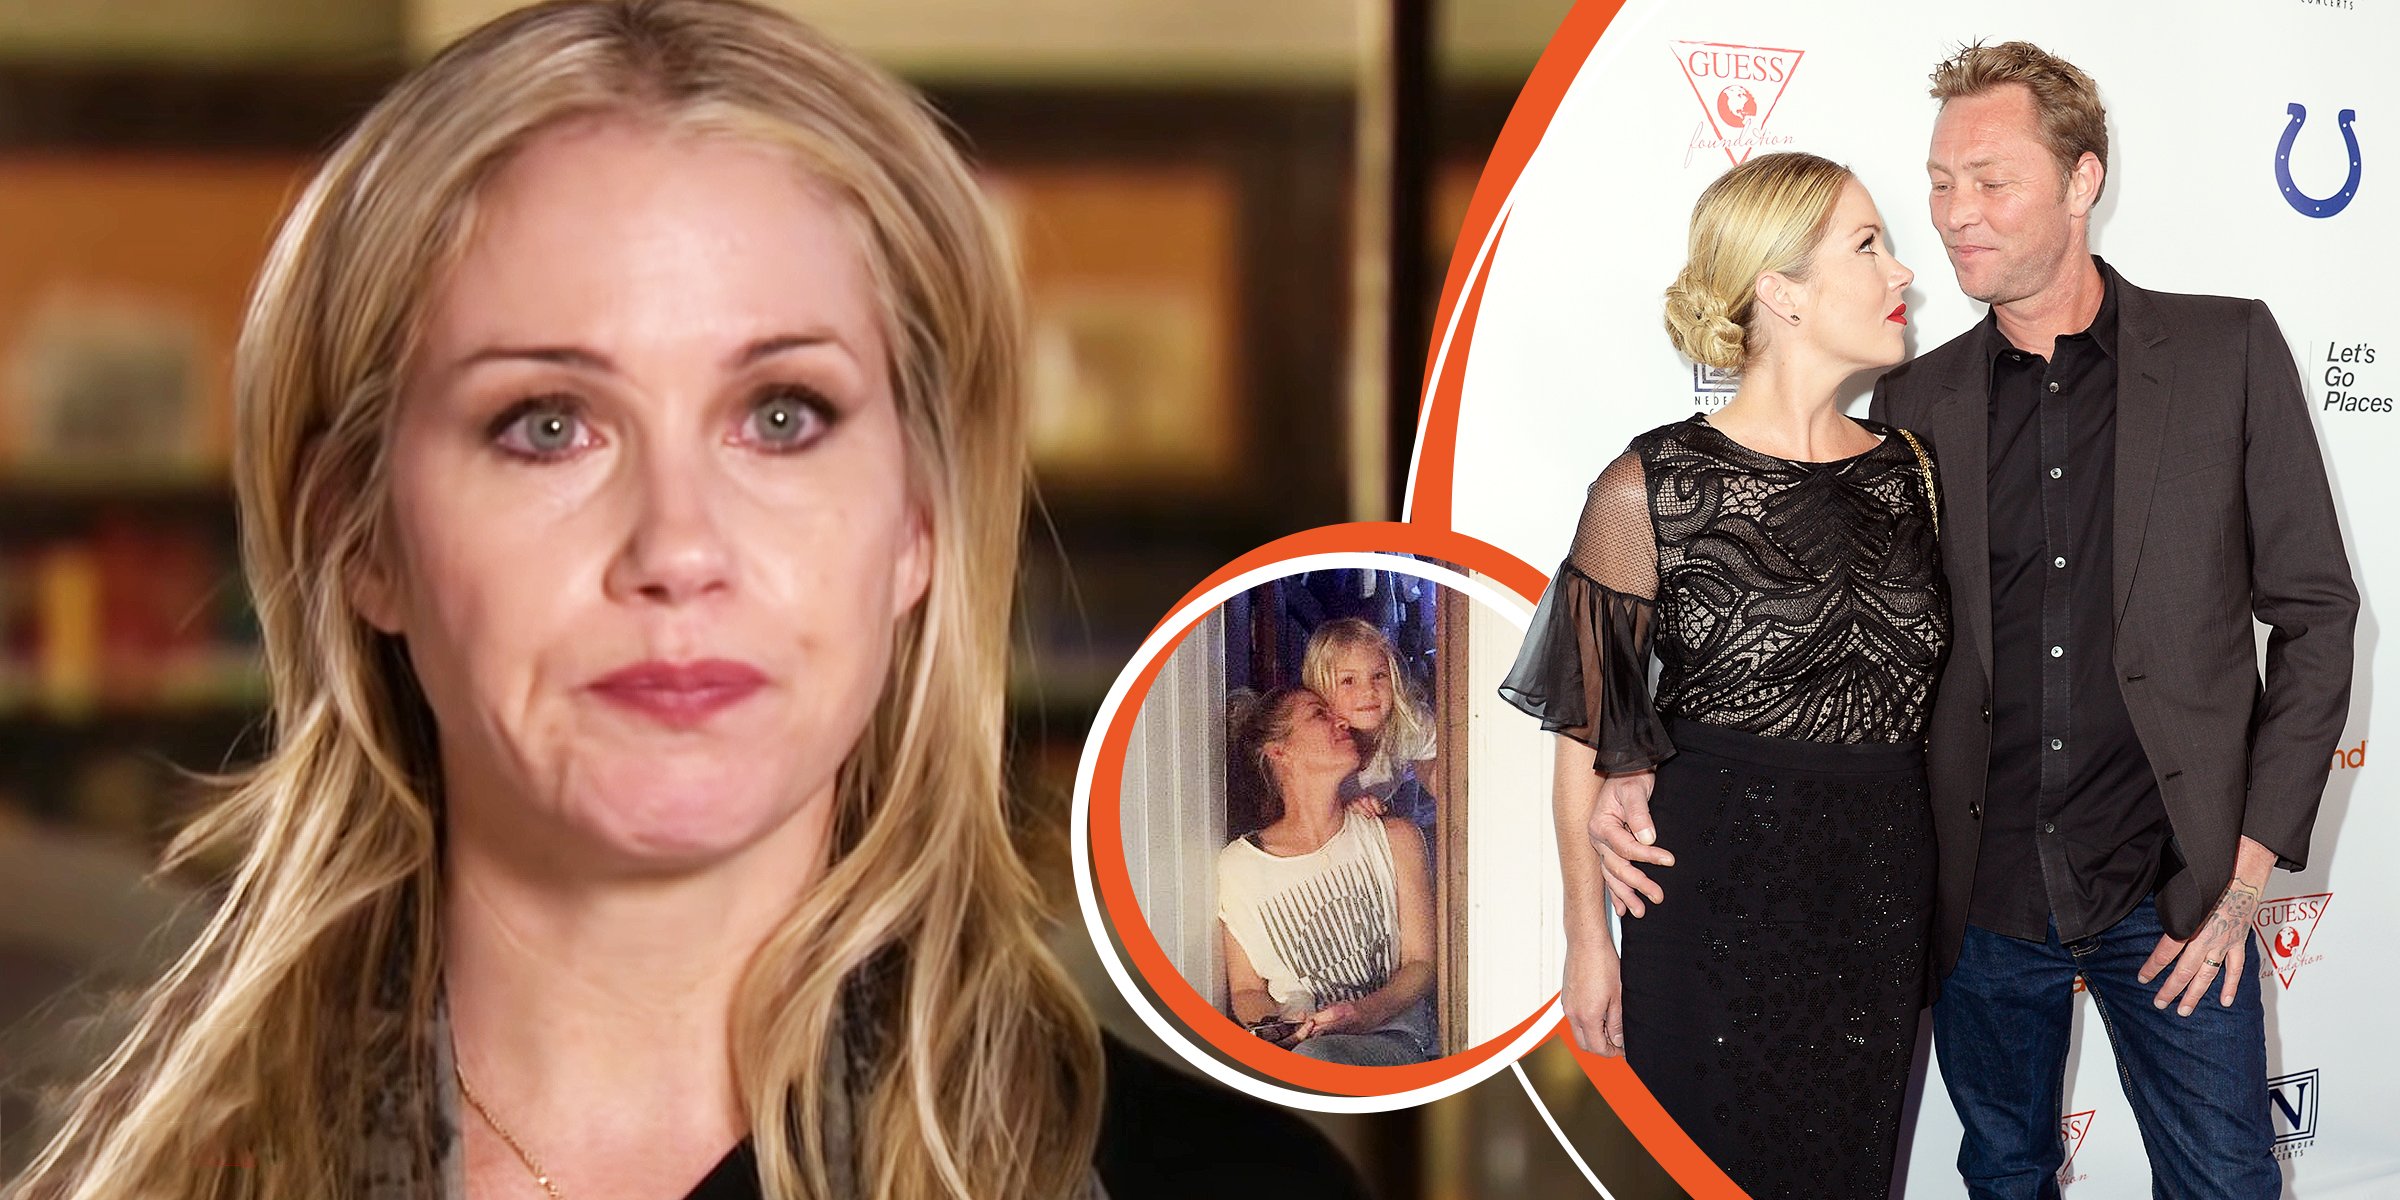 What Stage Breast Cancer Did The Actress Christina Applegate Have? Explore Her Health History